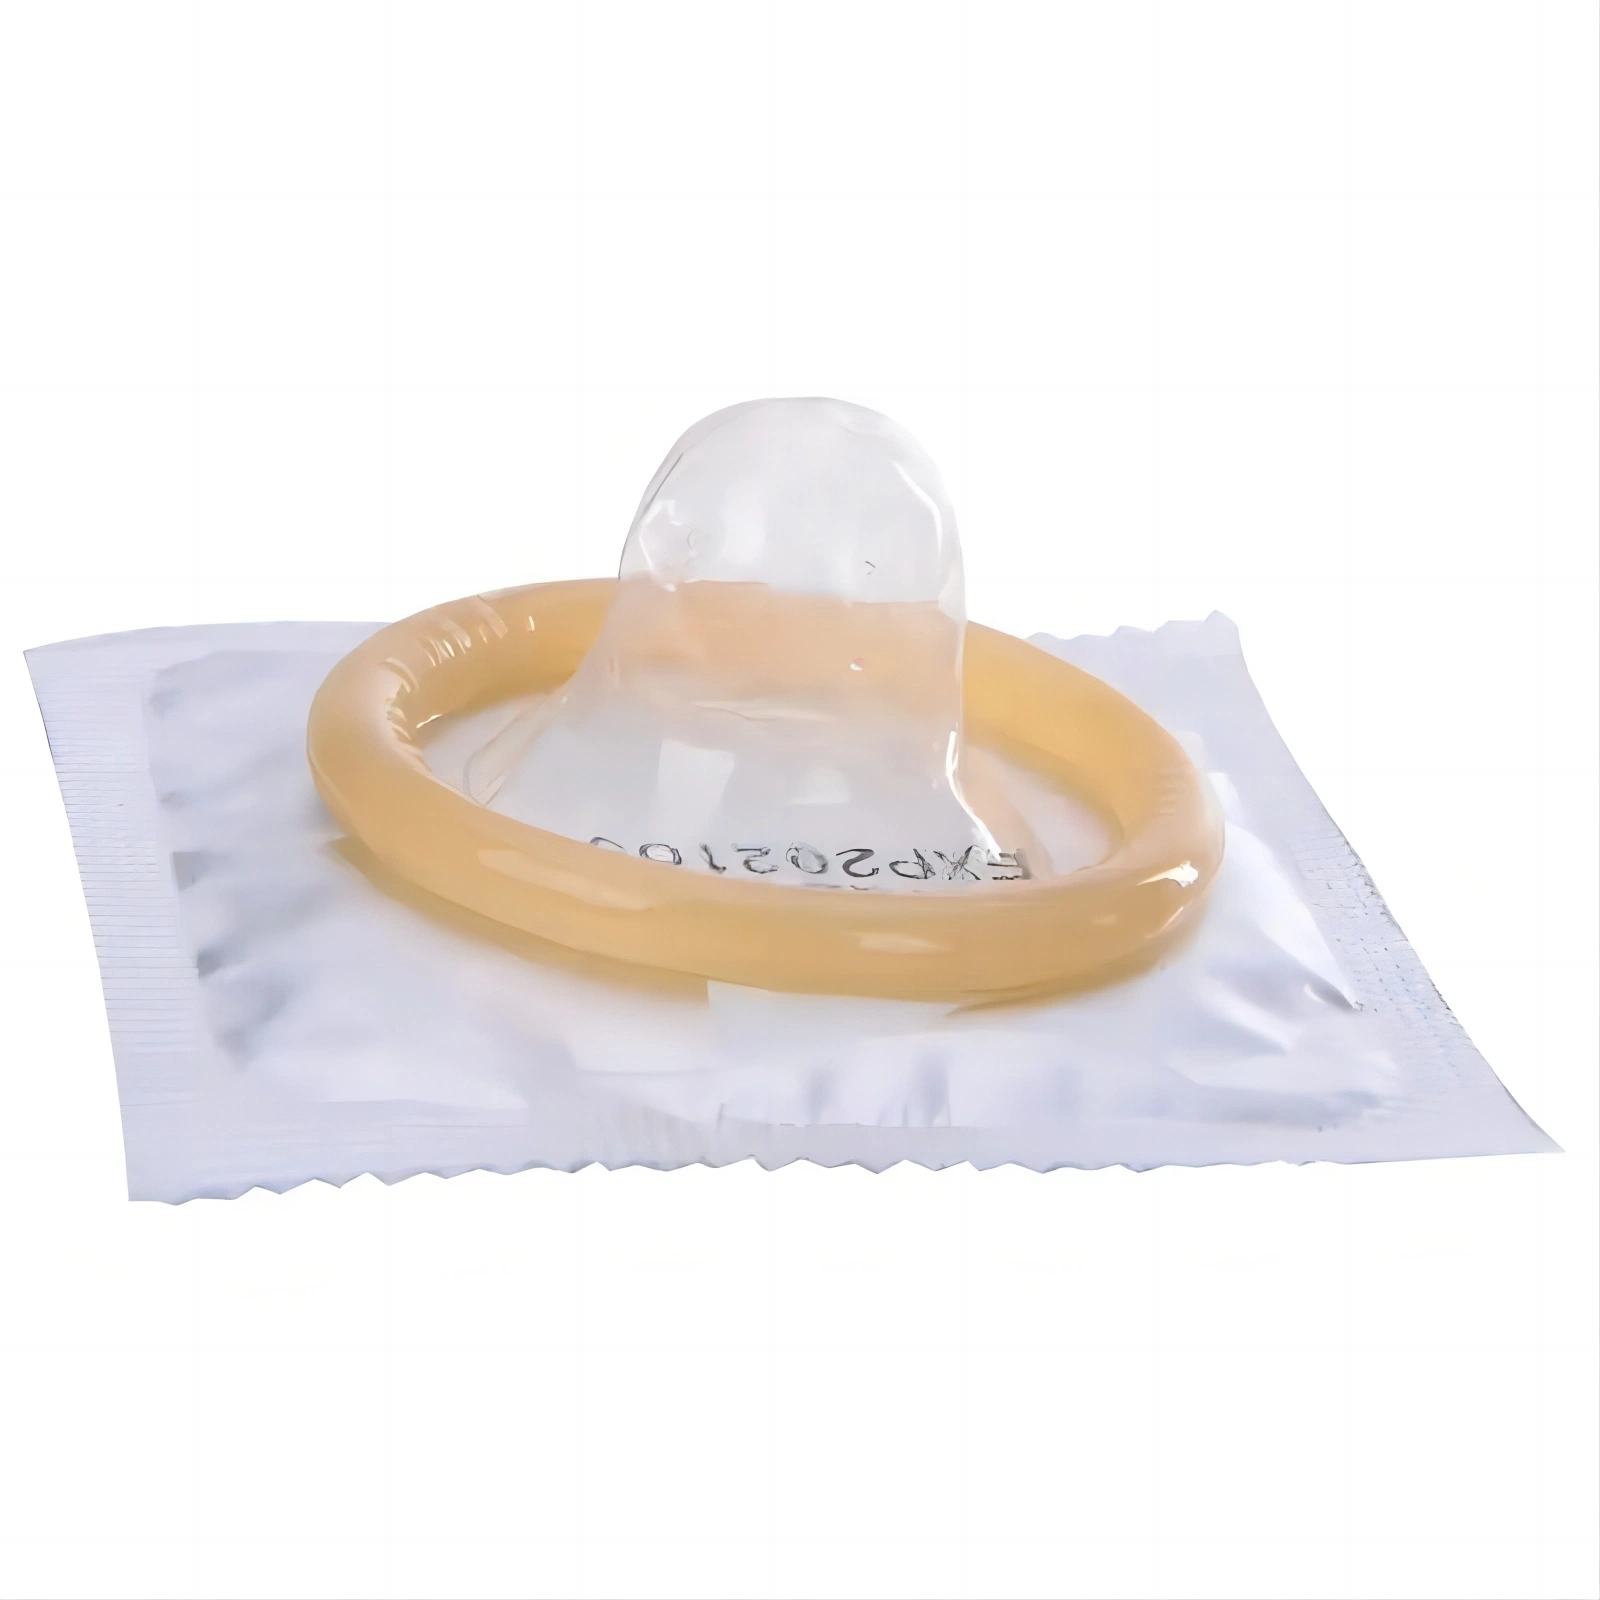 New Sexy Magic / Sex Toy Spike Condom for Man